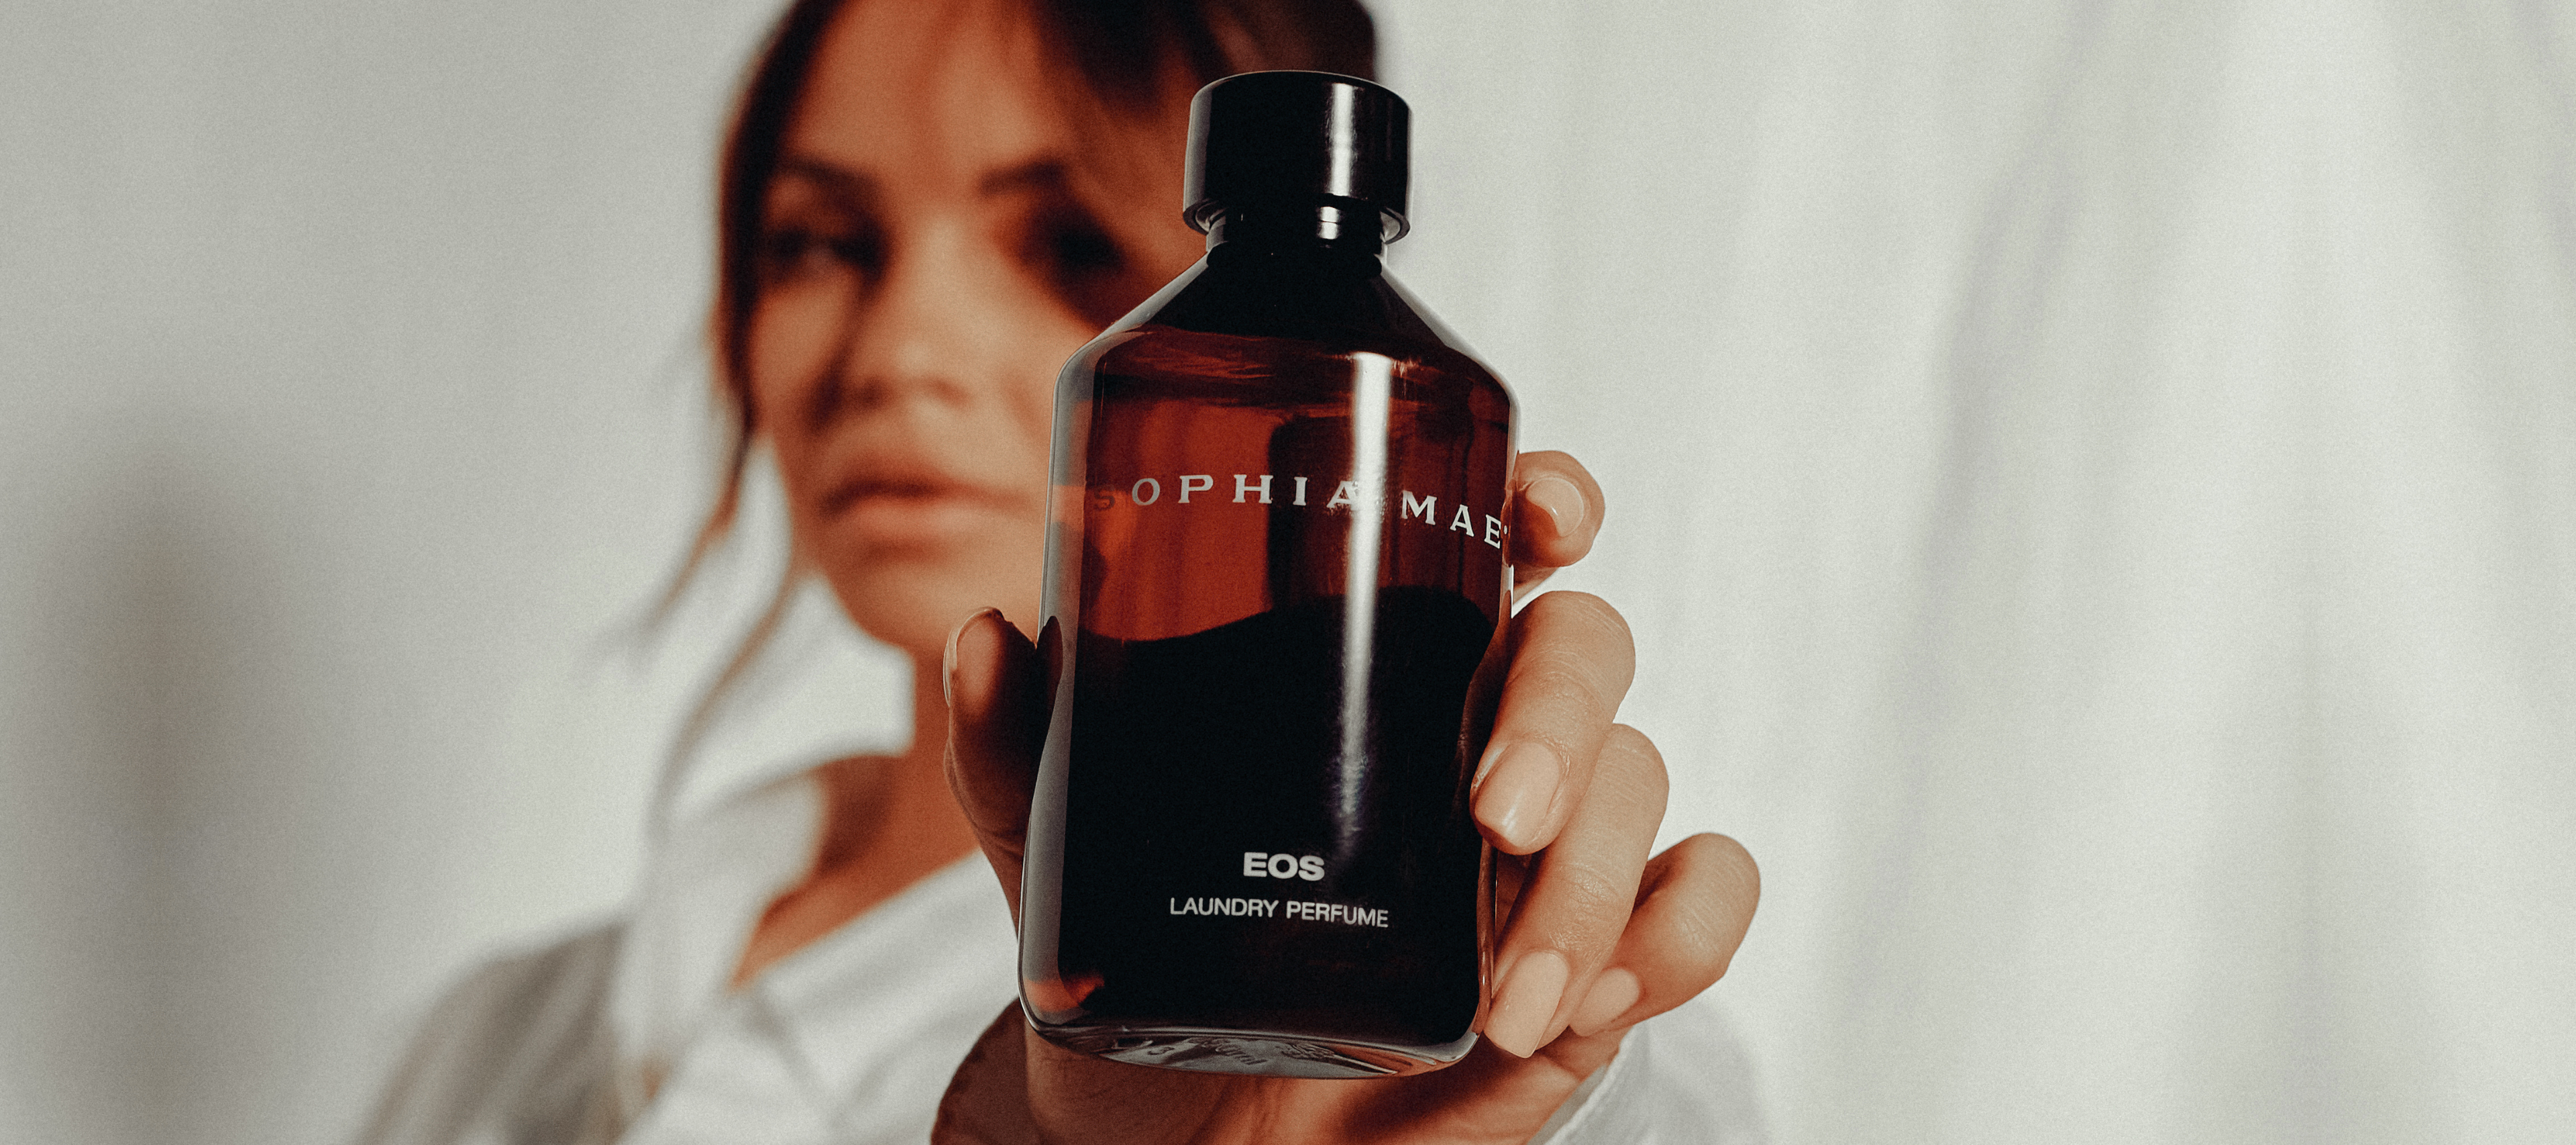 FROM CONCEPT TO CREATION: THE MAKING OF EOS LAUNDRY PERFUME